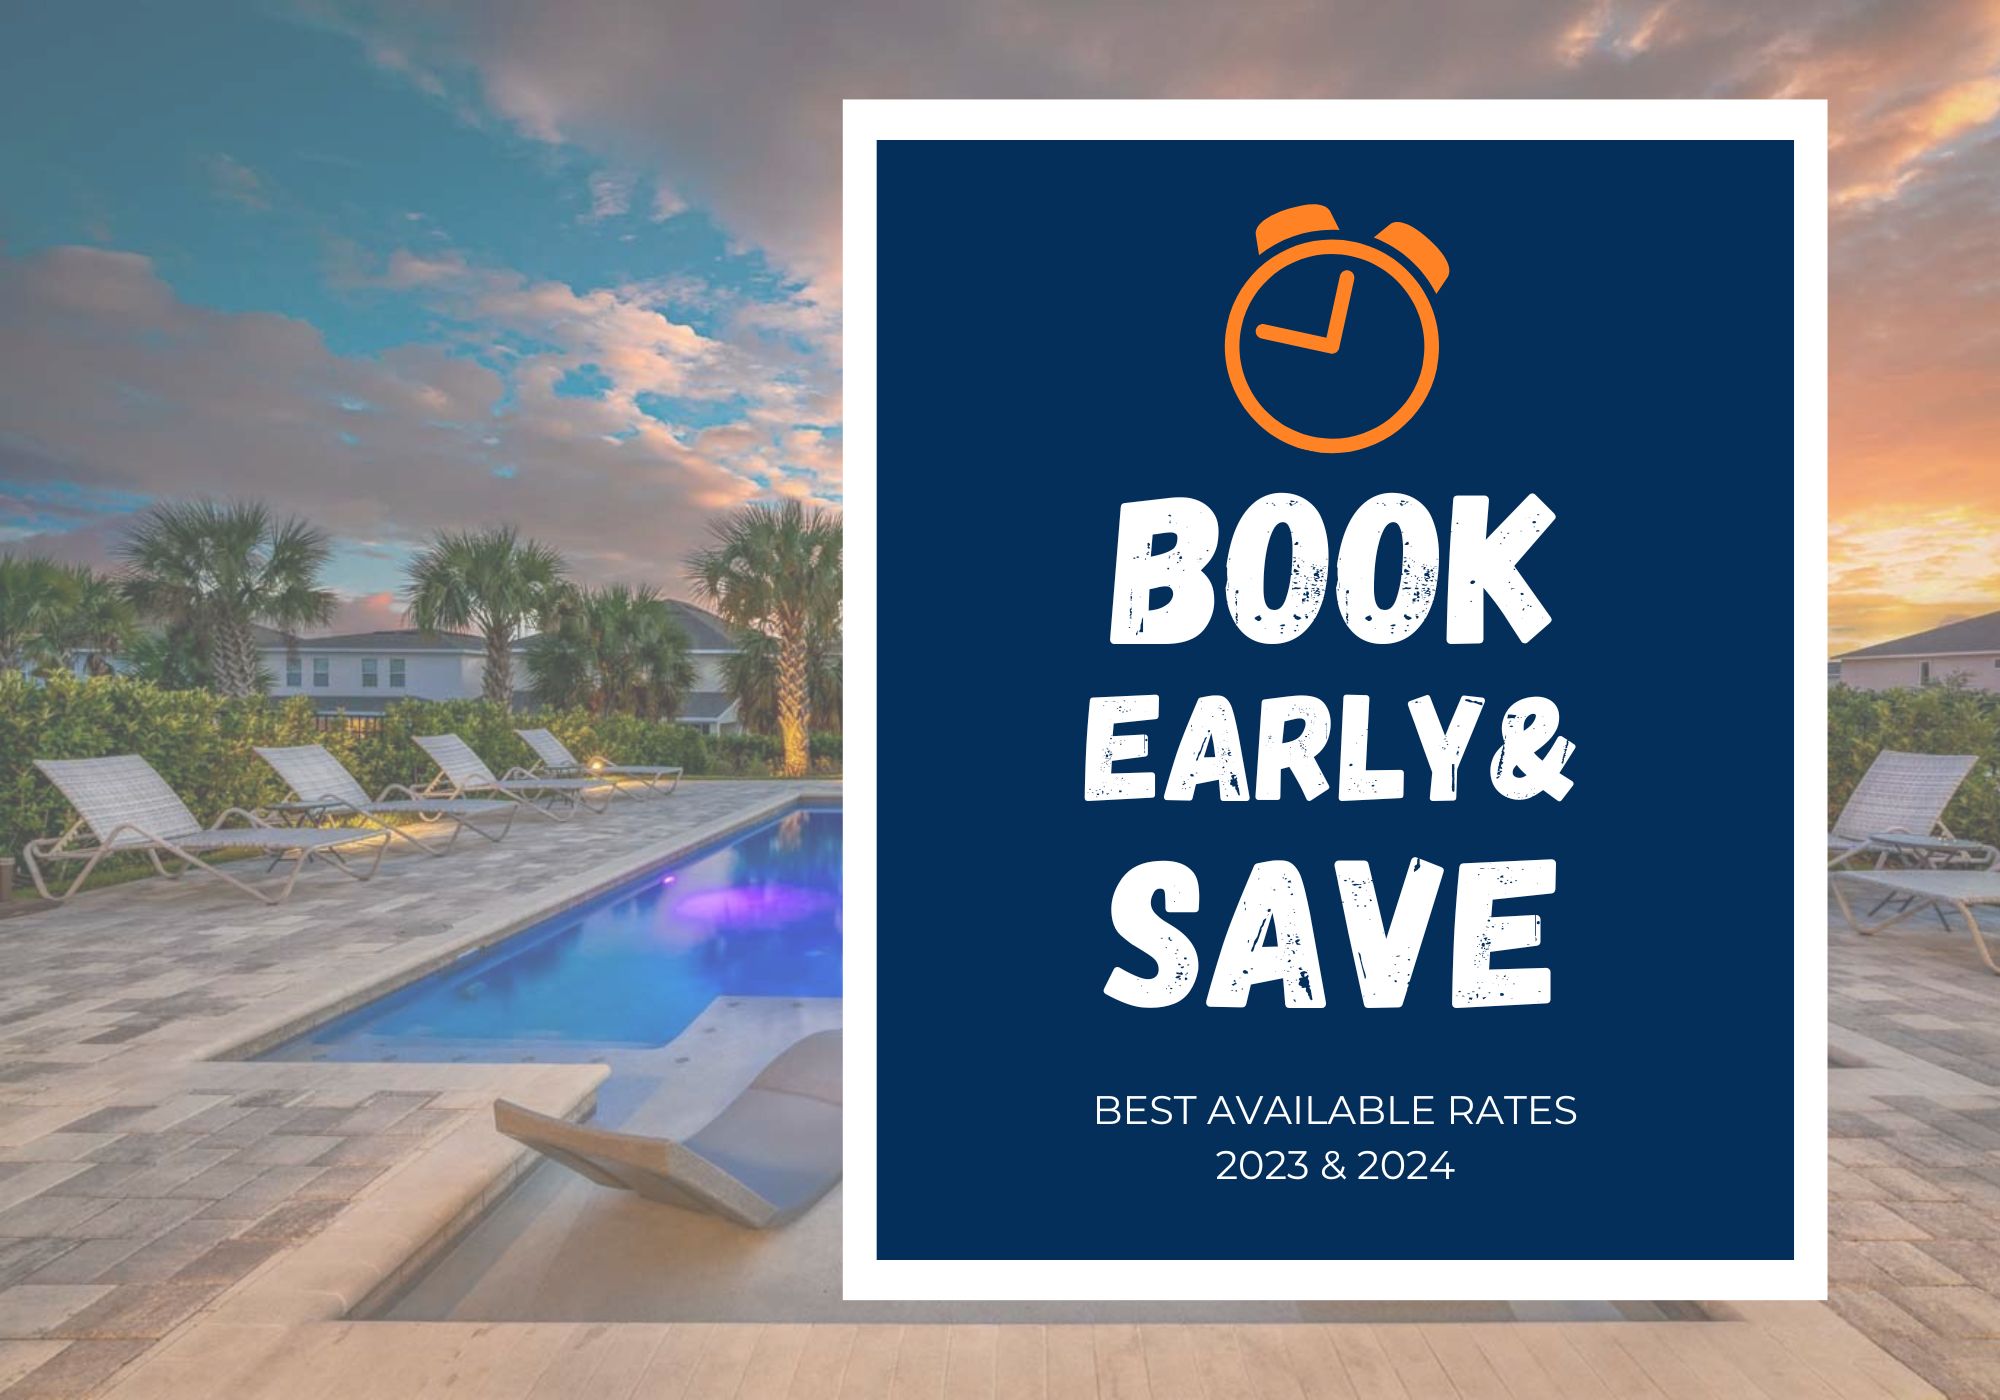 Book early and save 2023